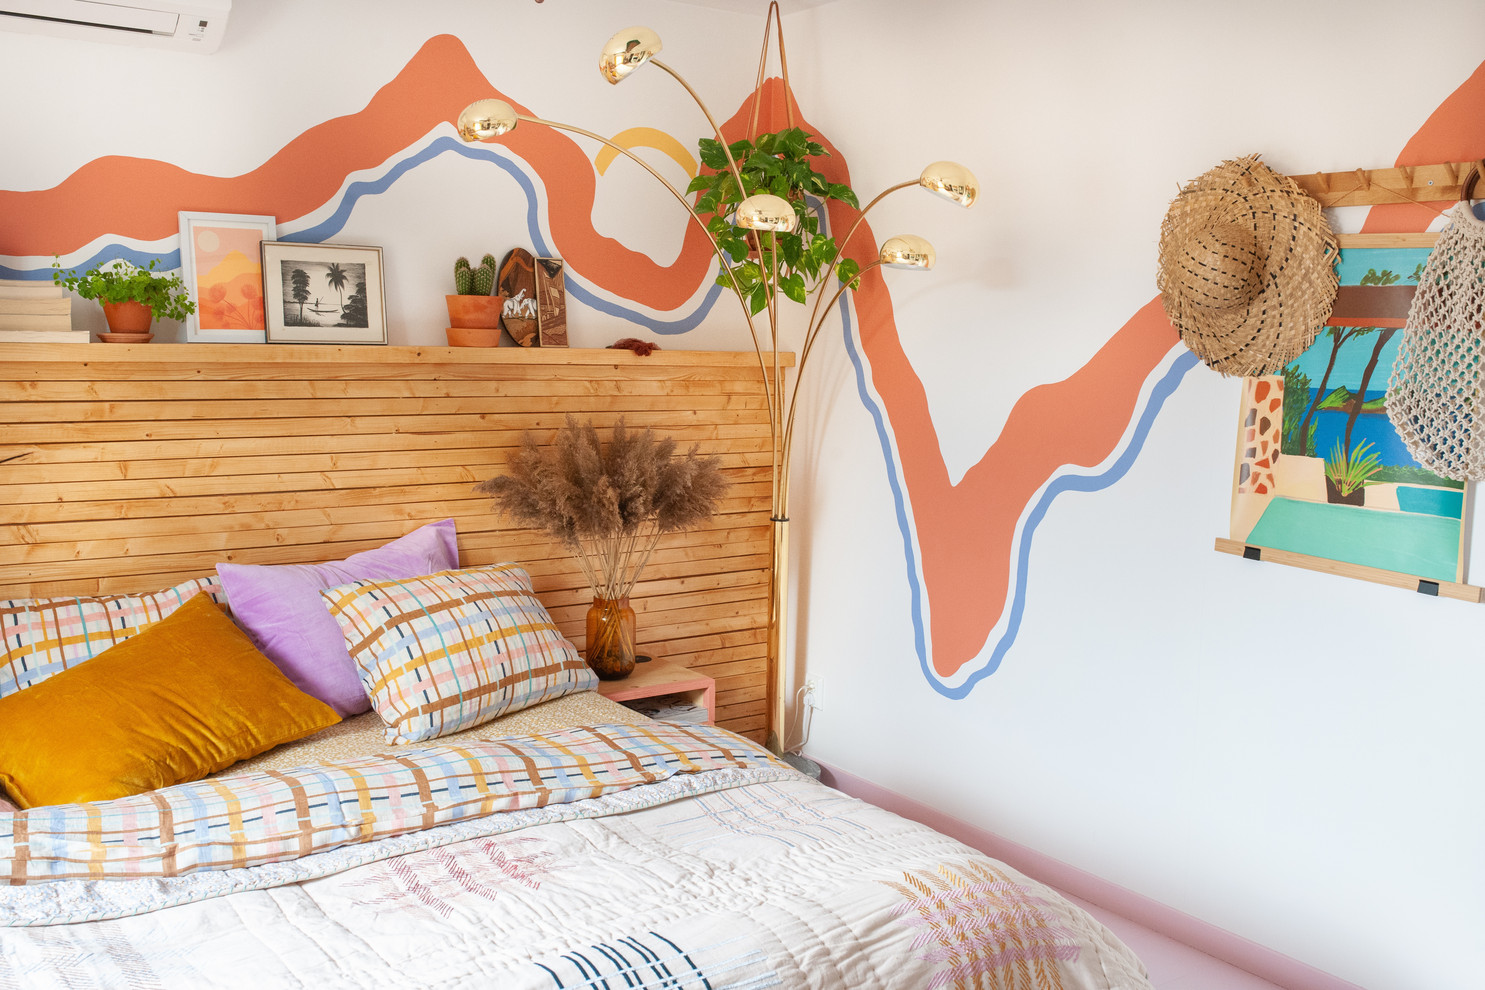 15 Magical Eclectic Bedroom Interiors You'll Never Forget